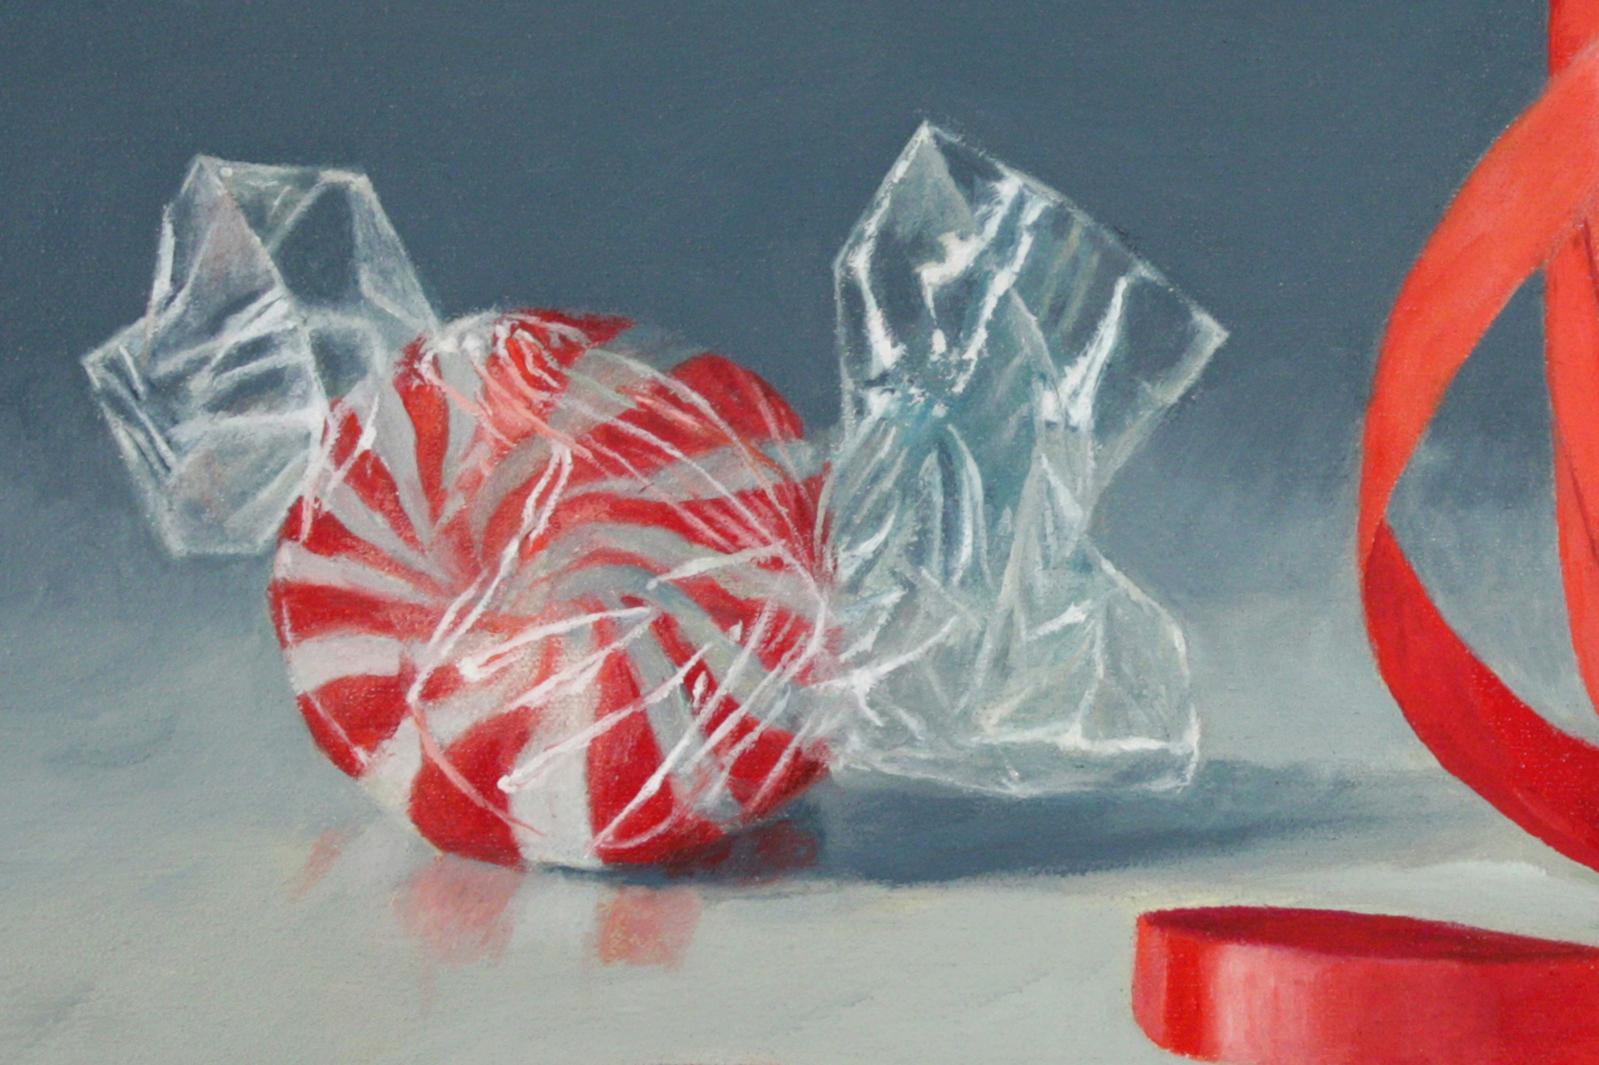 Red Spirals, colorful, superrealism, photorealism - Painting by Doug Newton